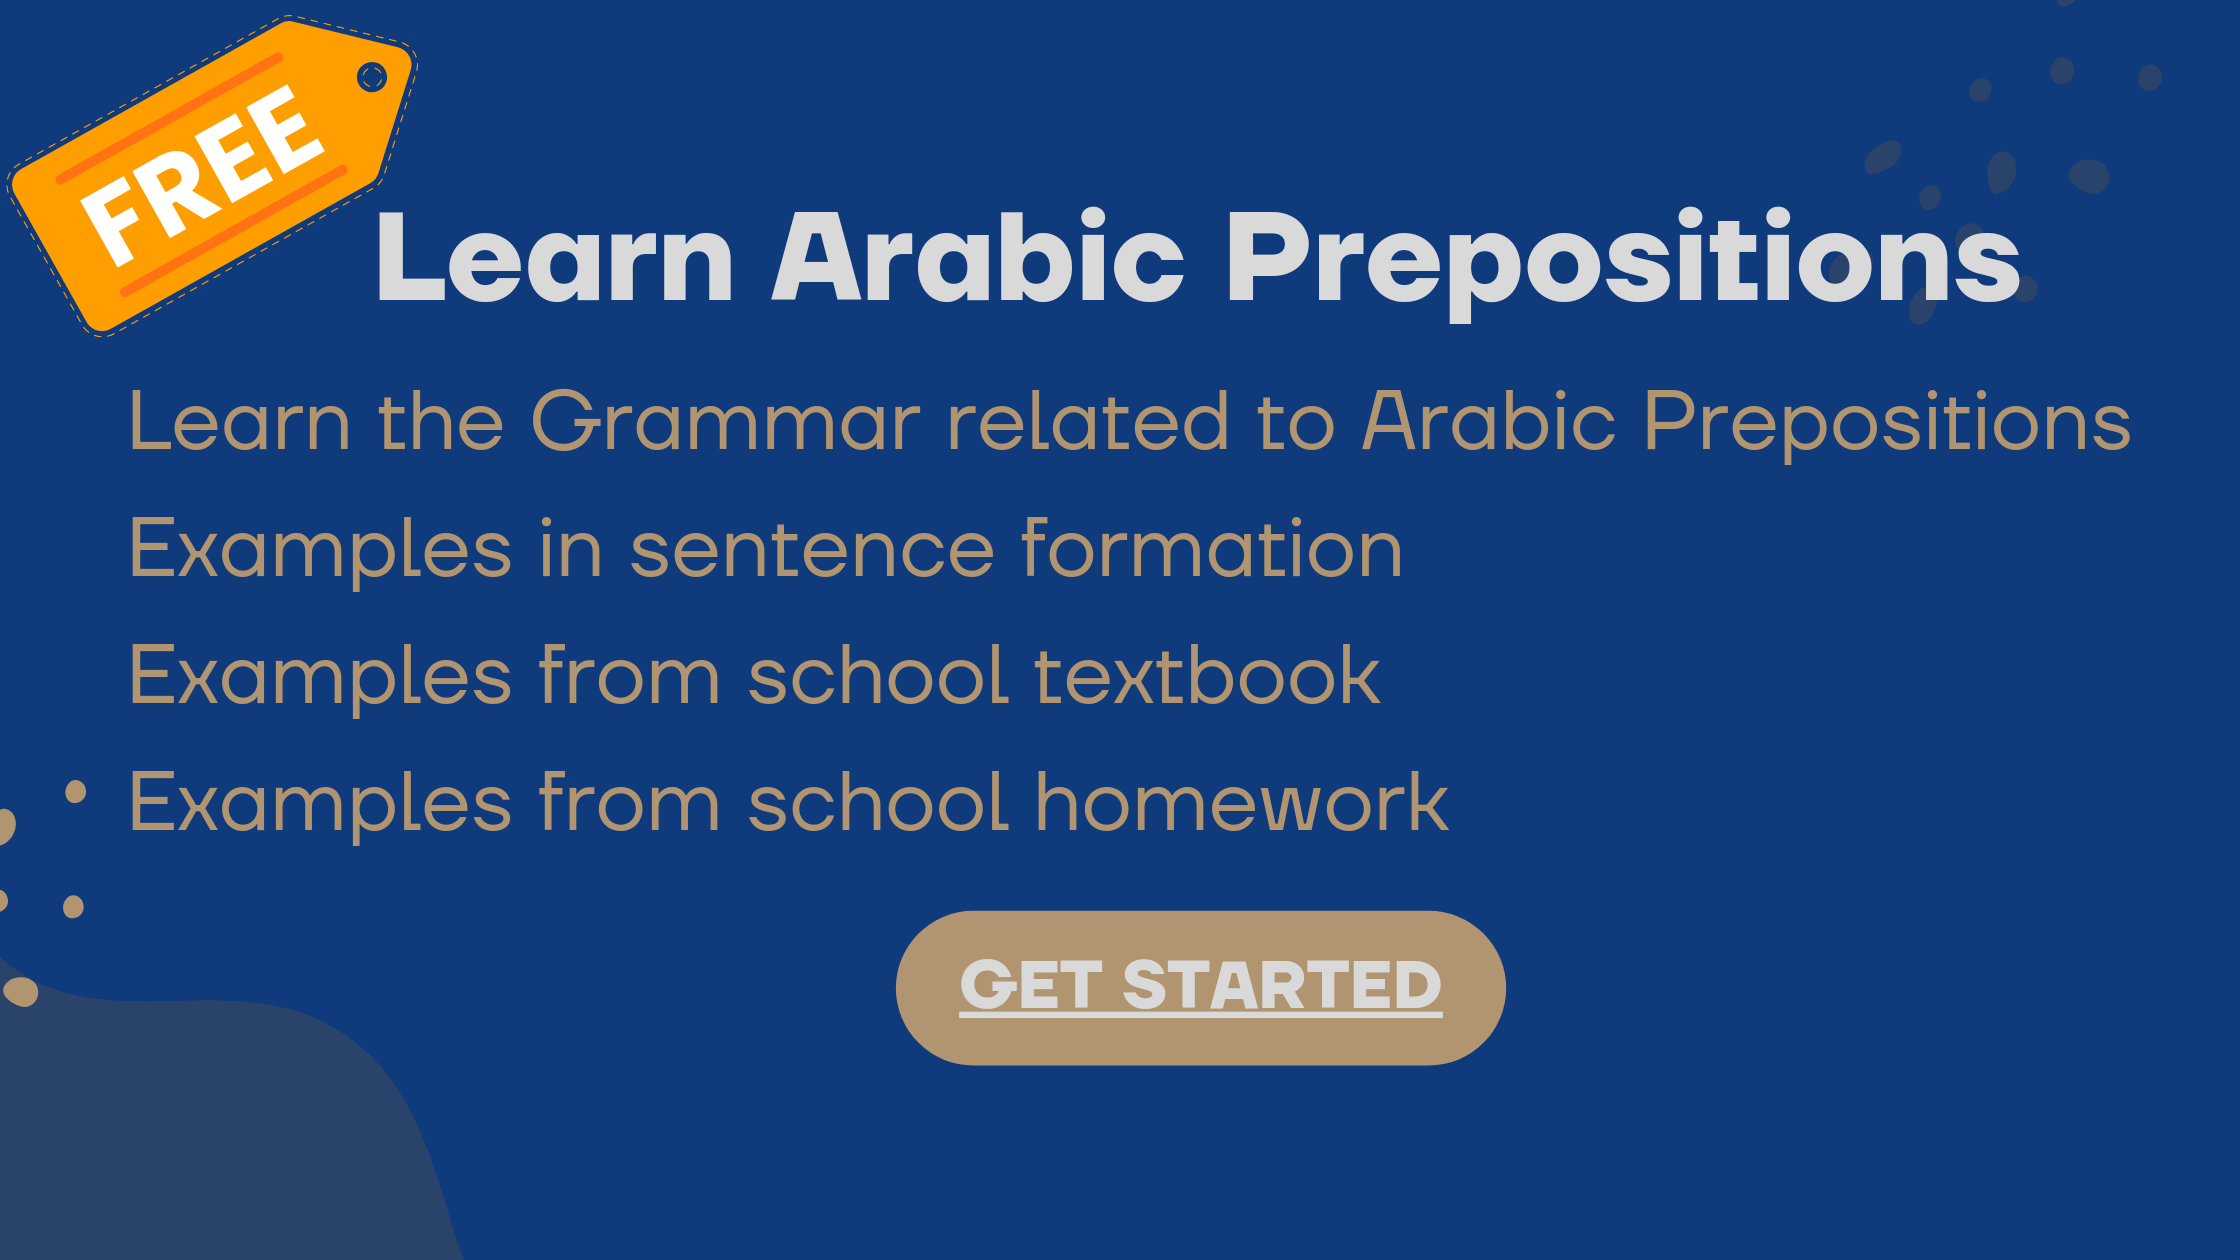 Arabic Prepositions - Learn the Grammar related to Arabic Prepositions